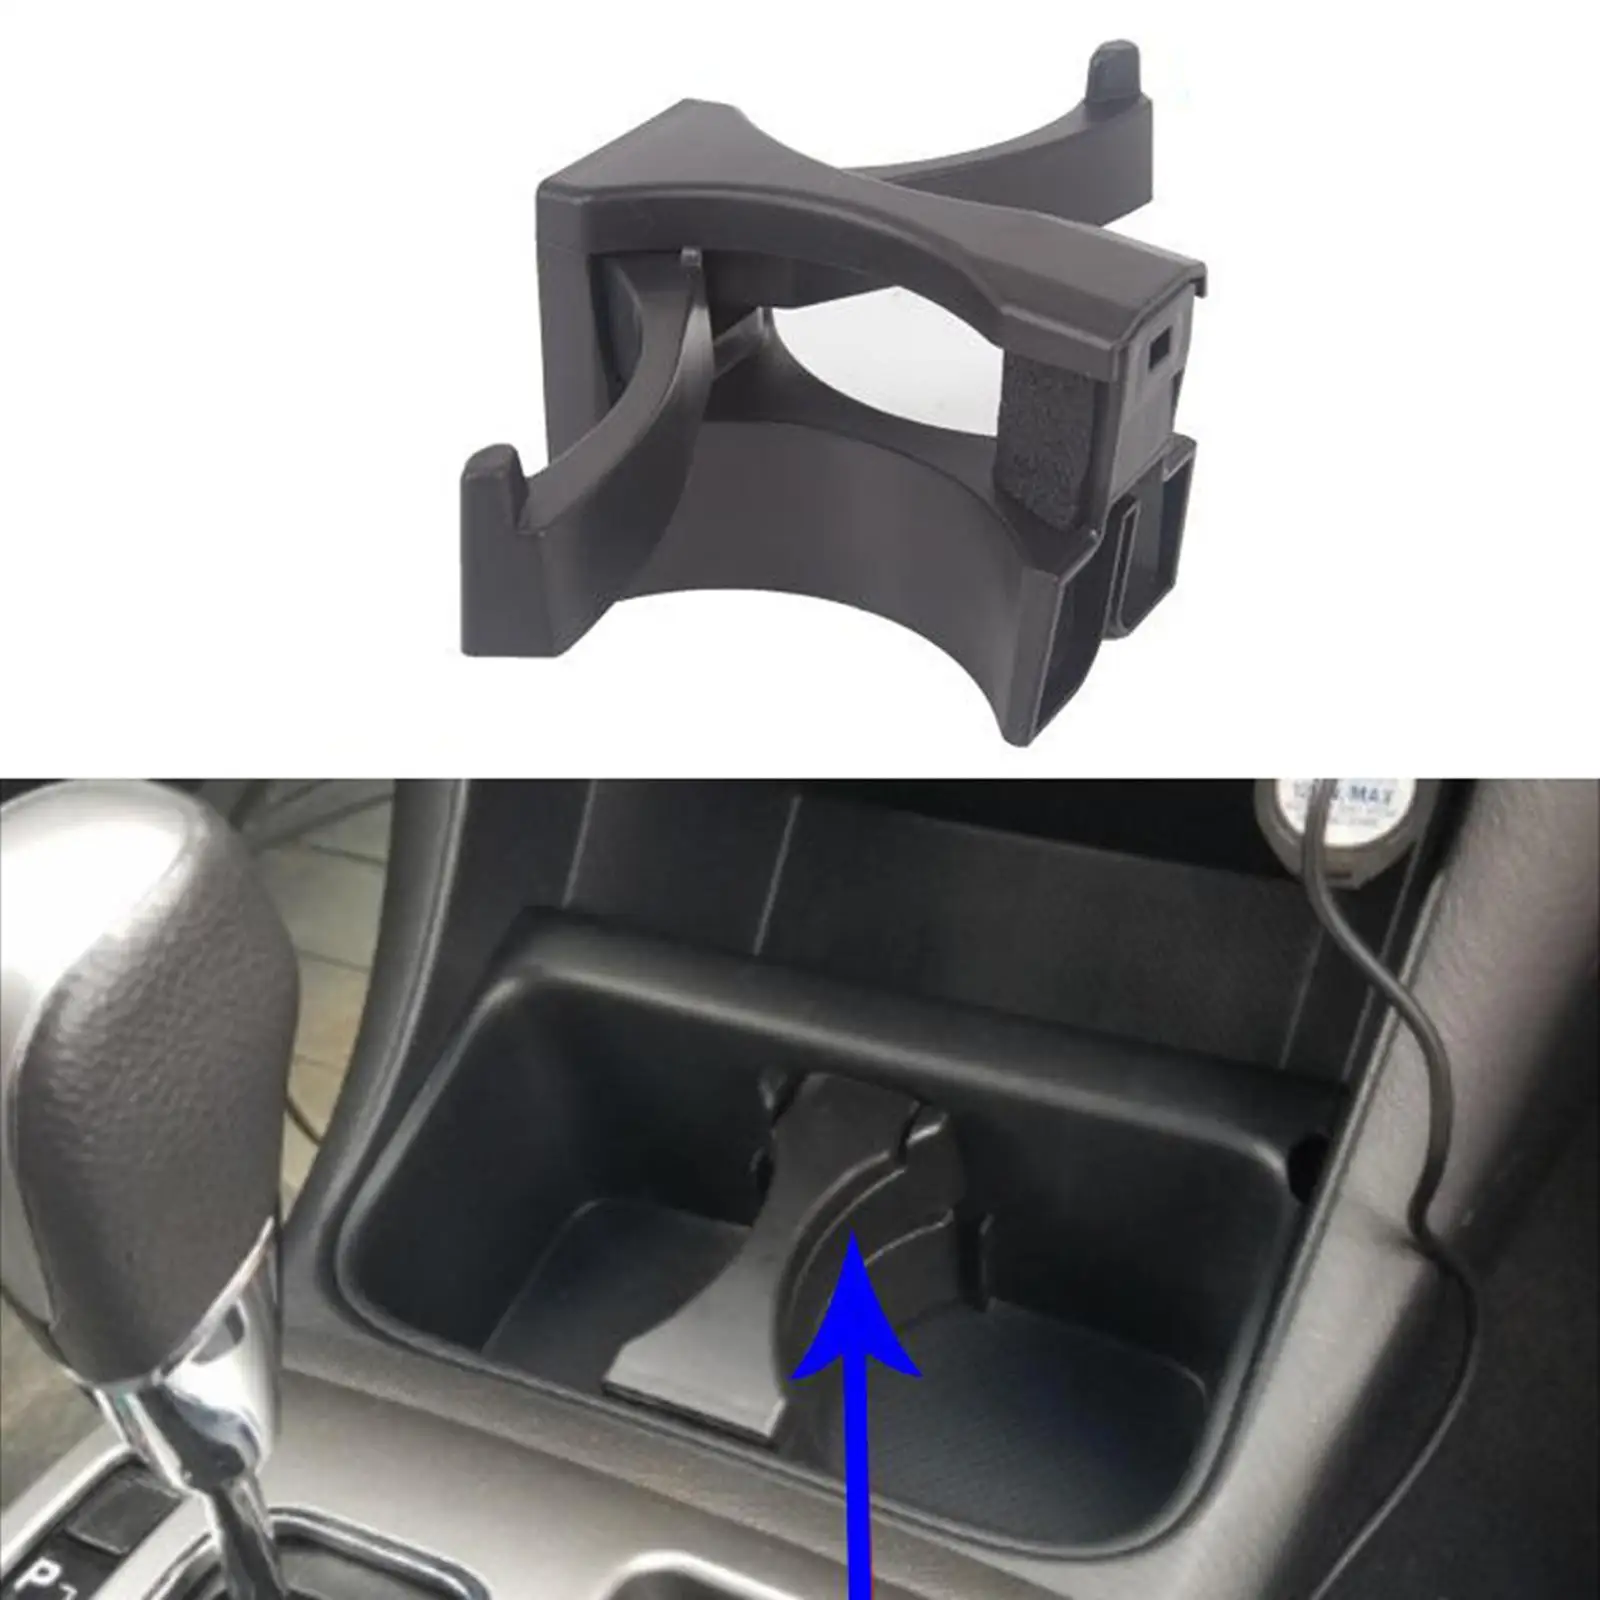 balikha Car Auto Center Console Cup Holder Insert Divider Separator Fits for